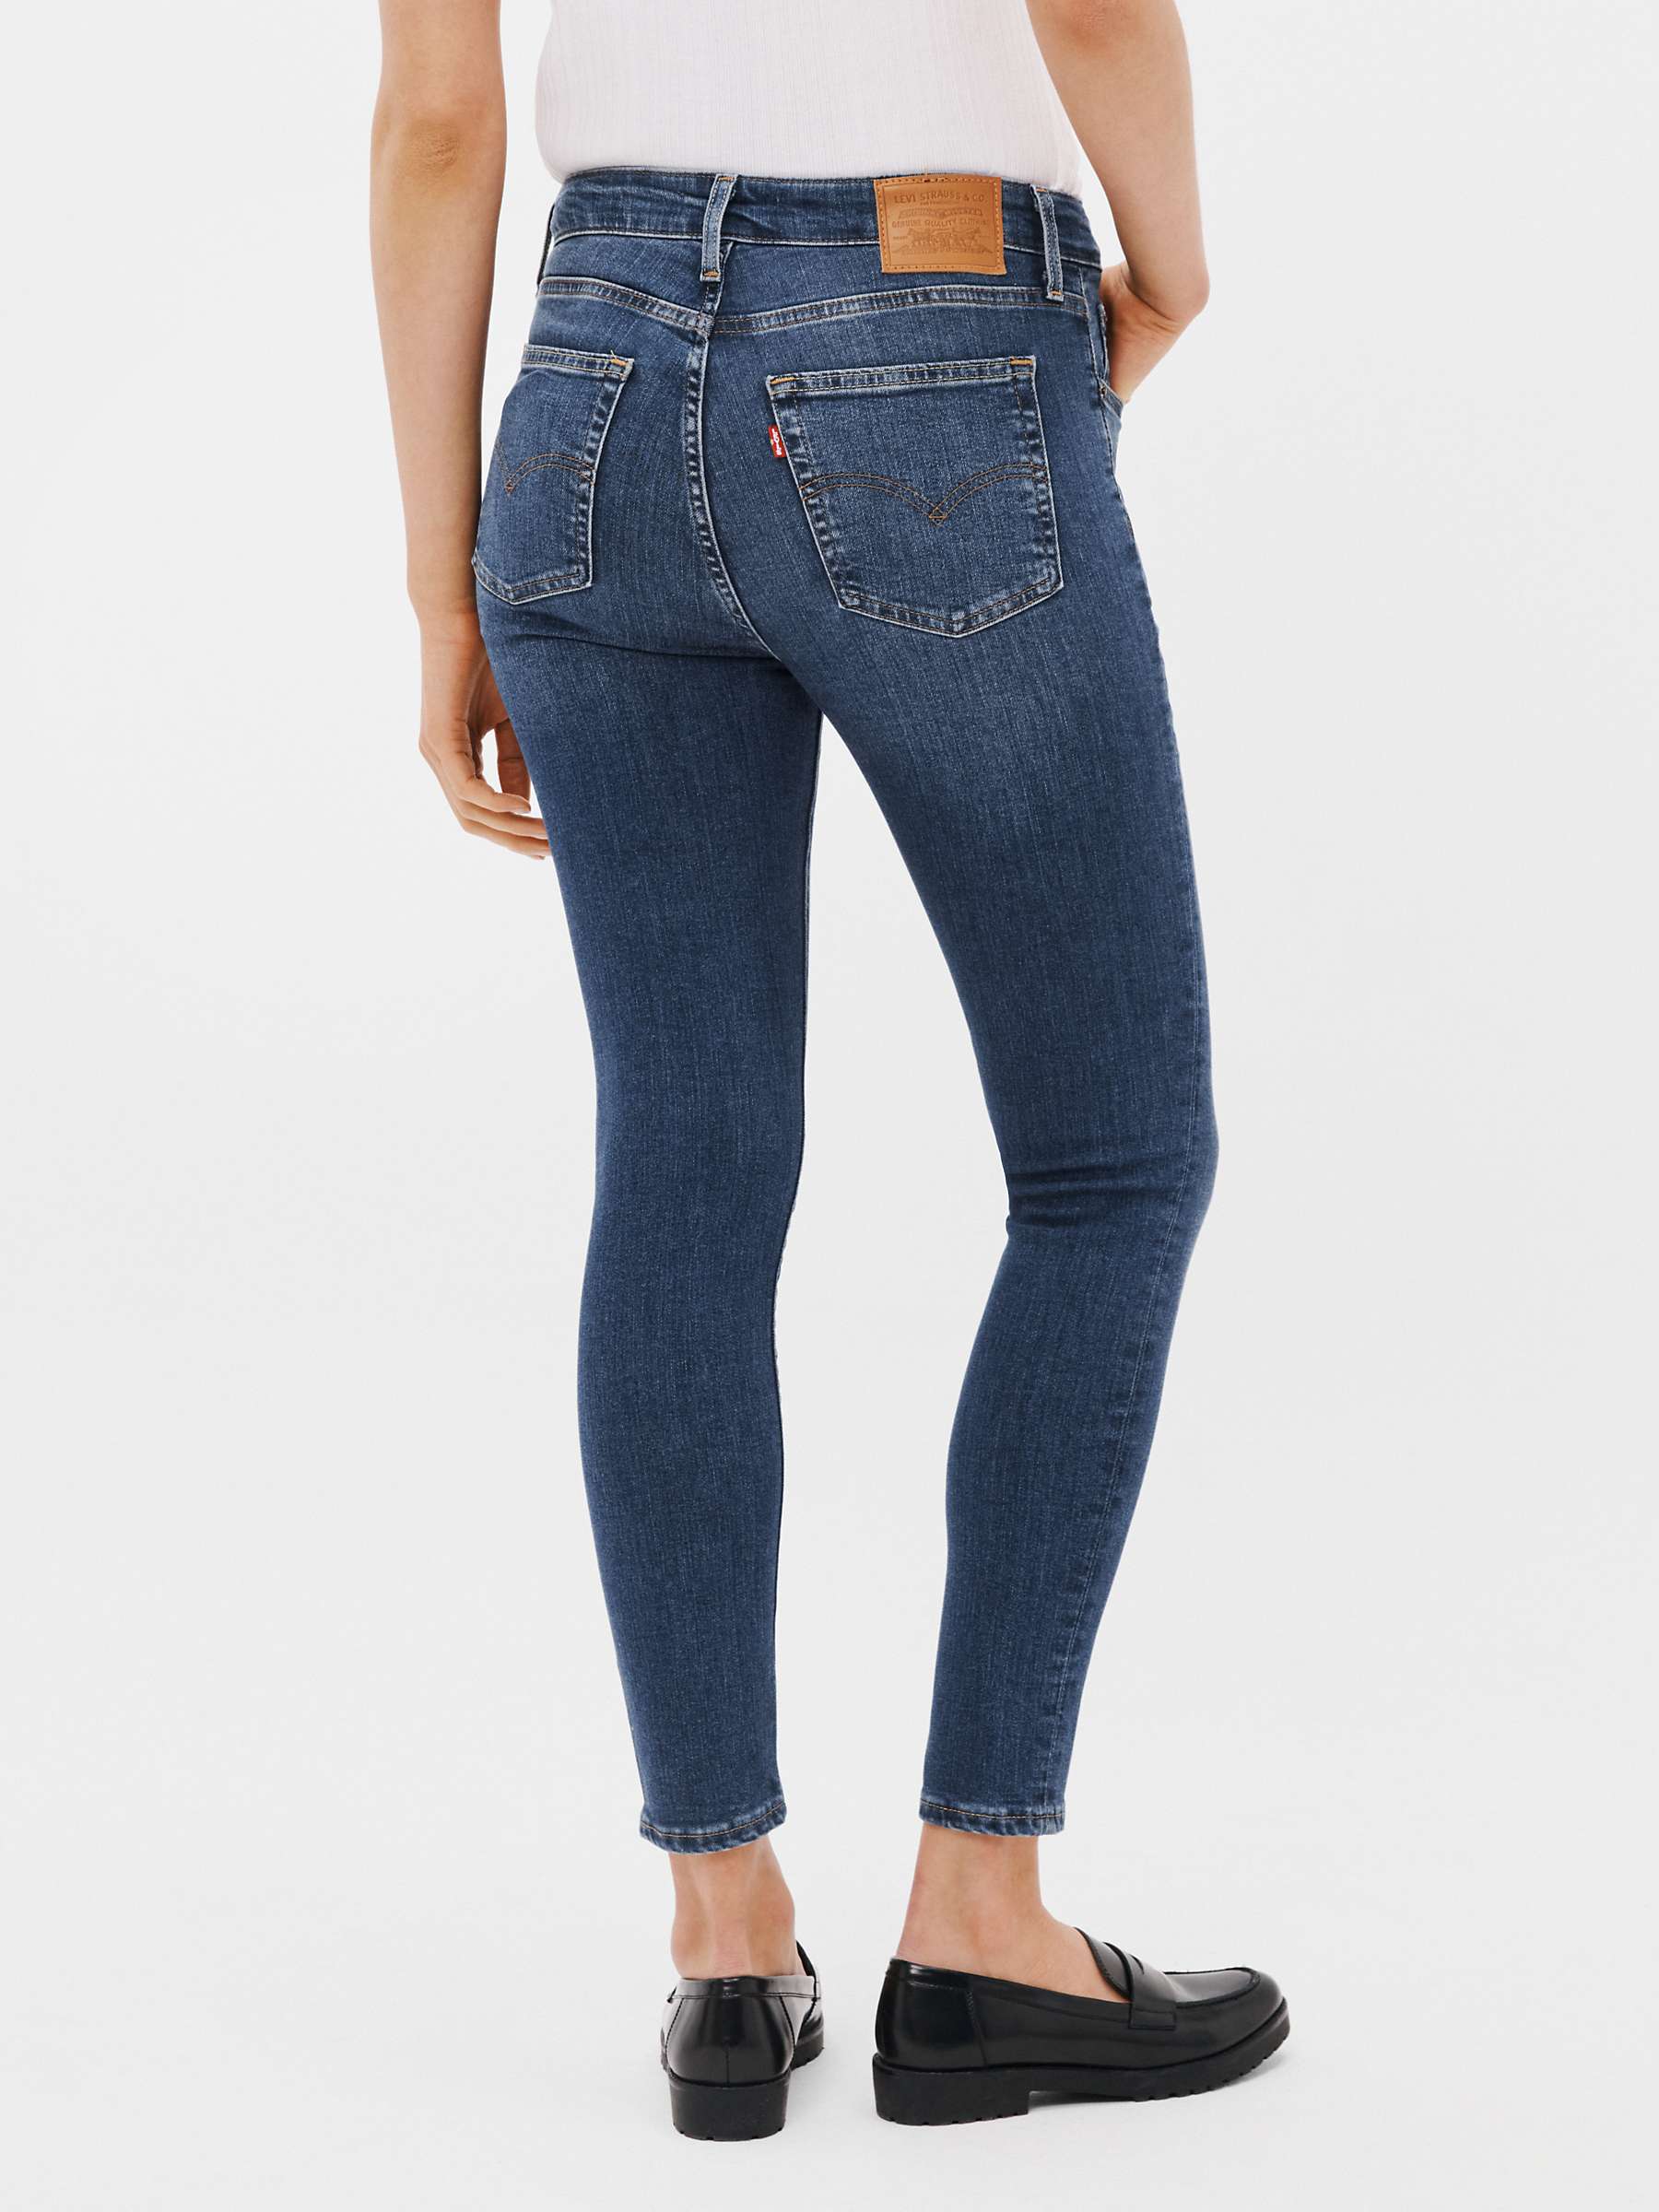 Buy Levi's 721 High Rise Skinny Jeans Online at johnlewis.com